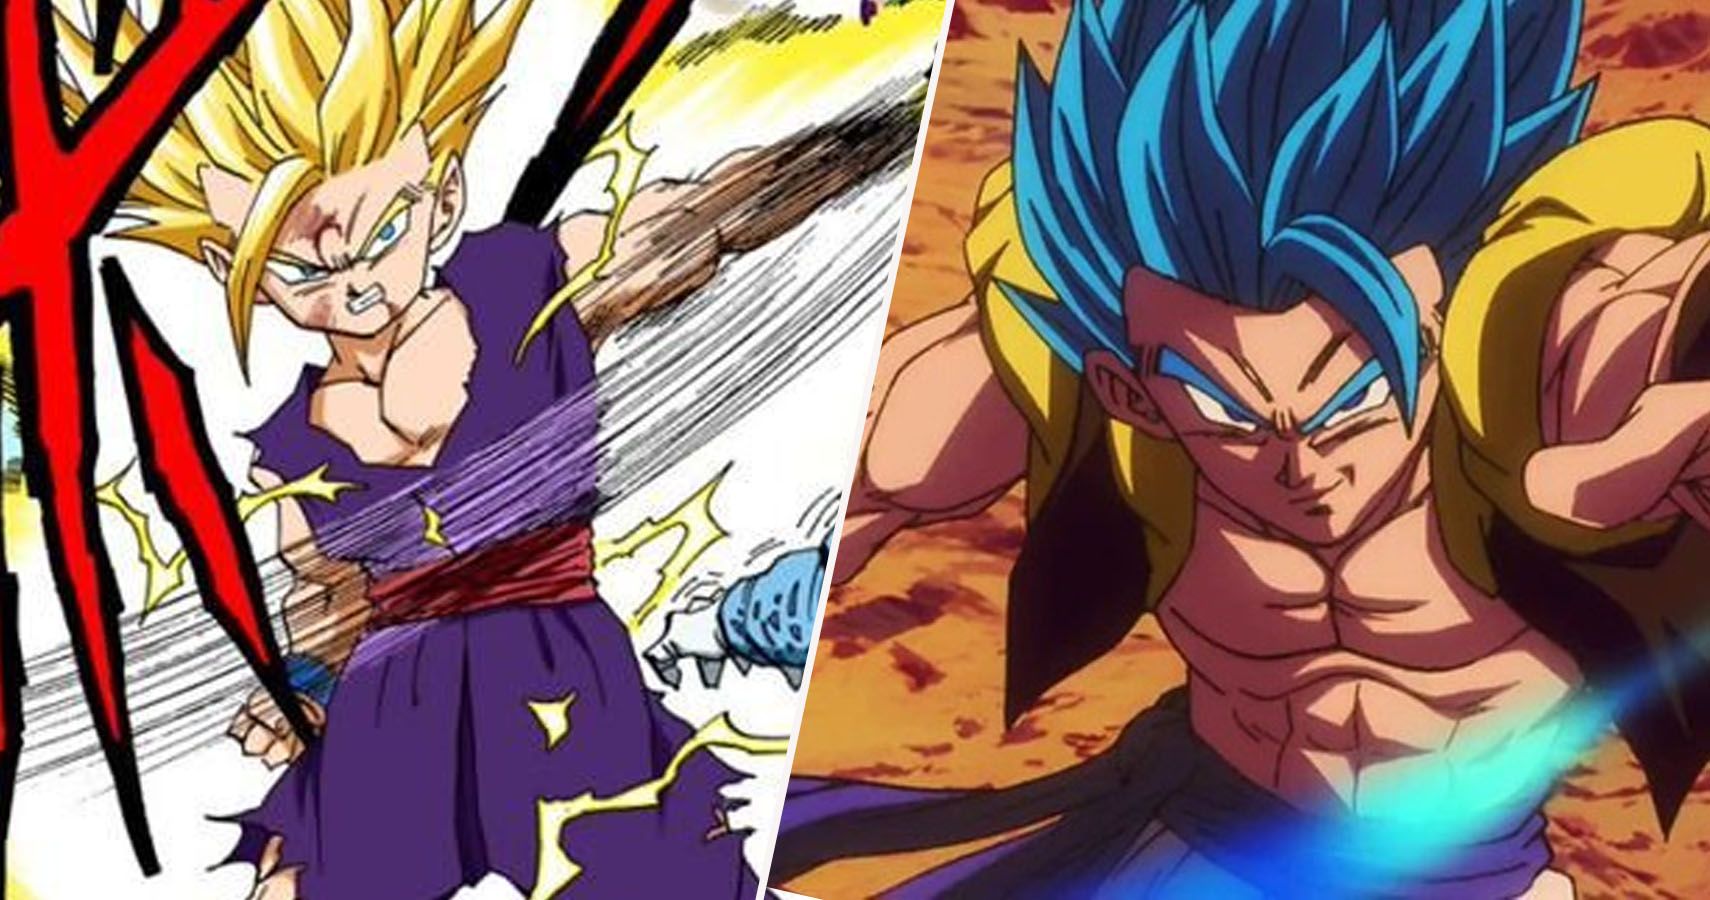 Dragon Ball: Every Arc Where Goku Didn't Save The Day (In Chronological Order)